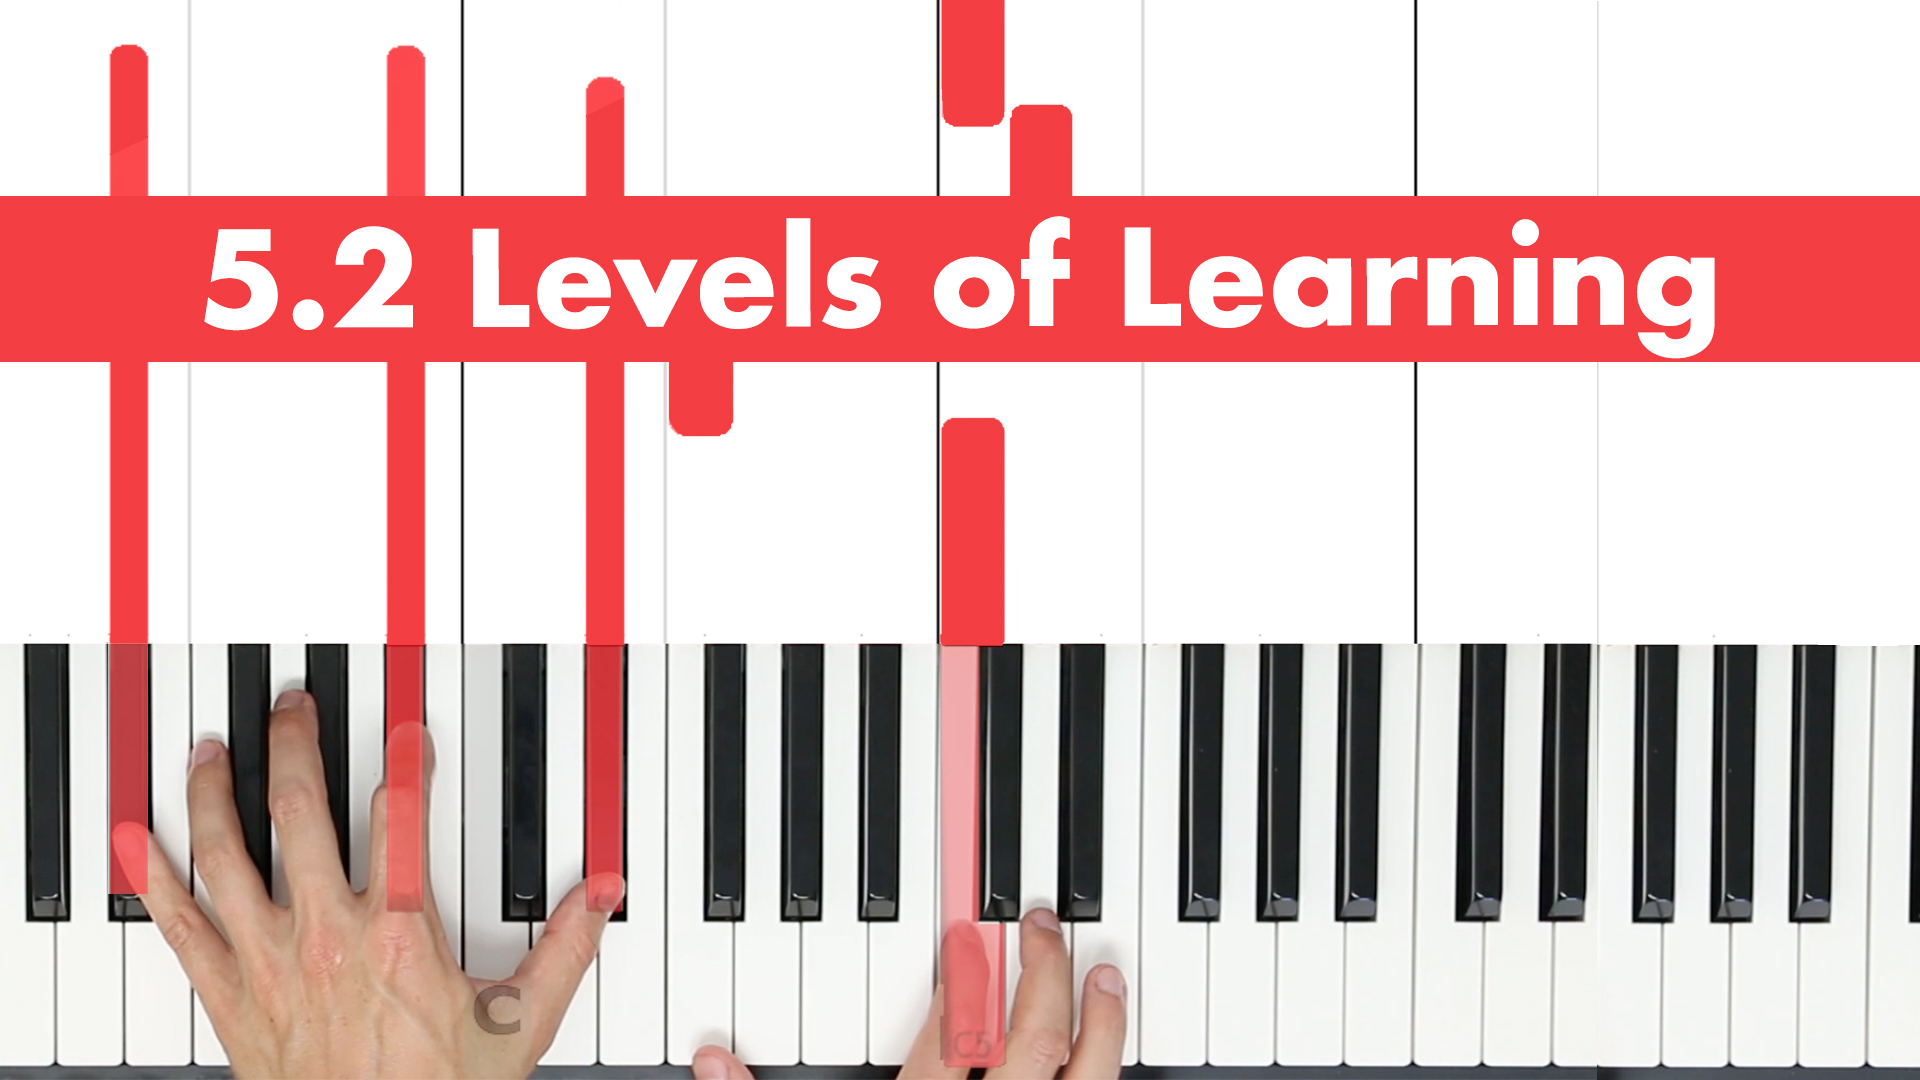 5.2 Levels of Learning